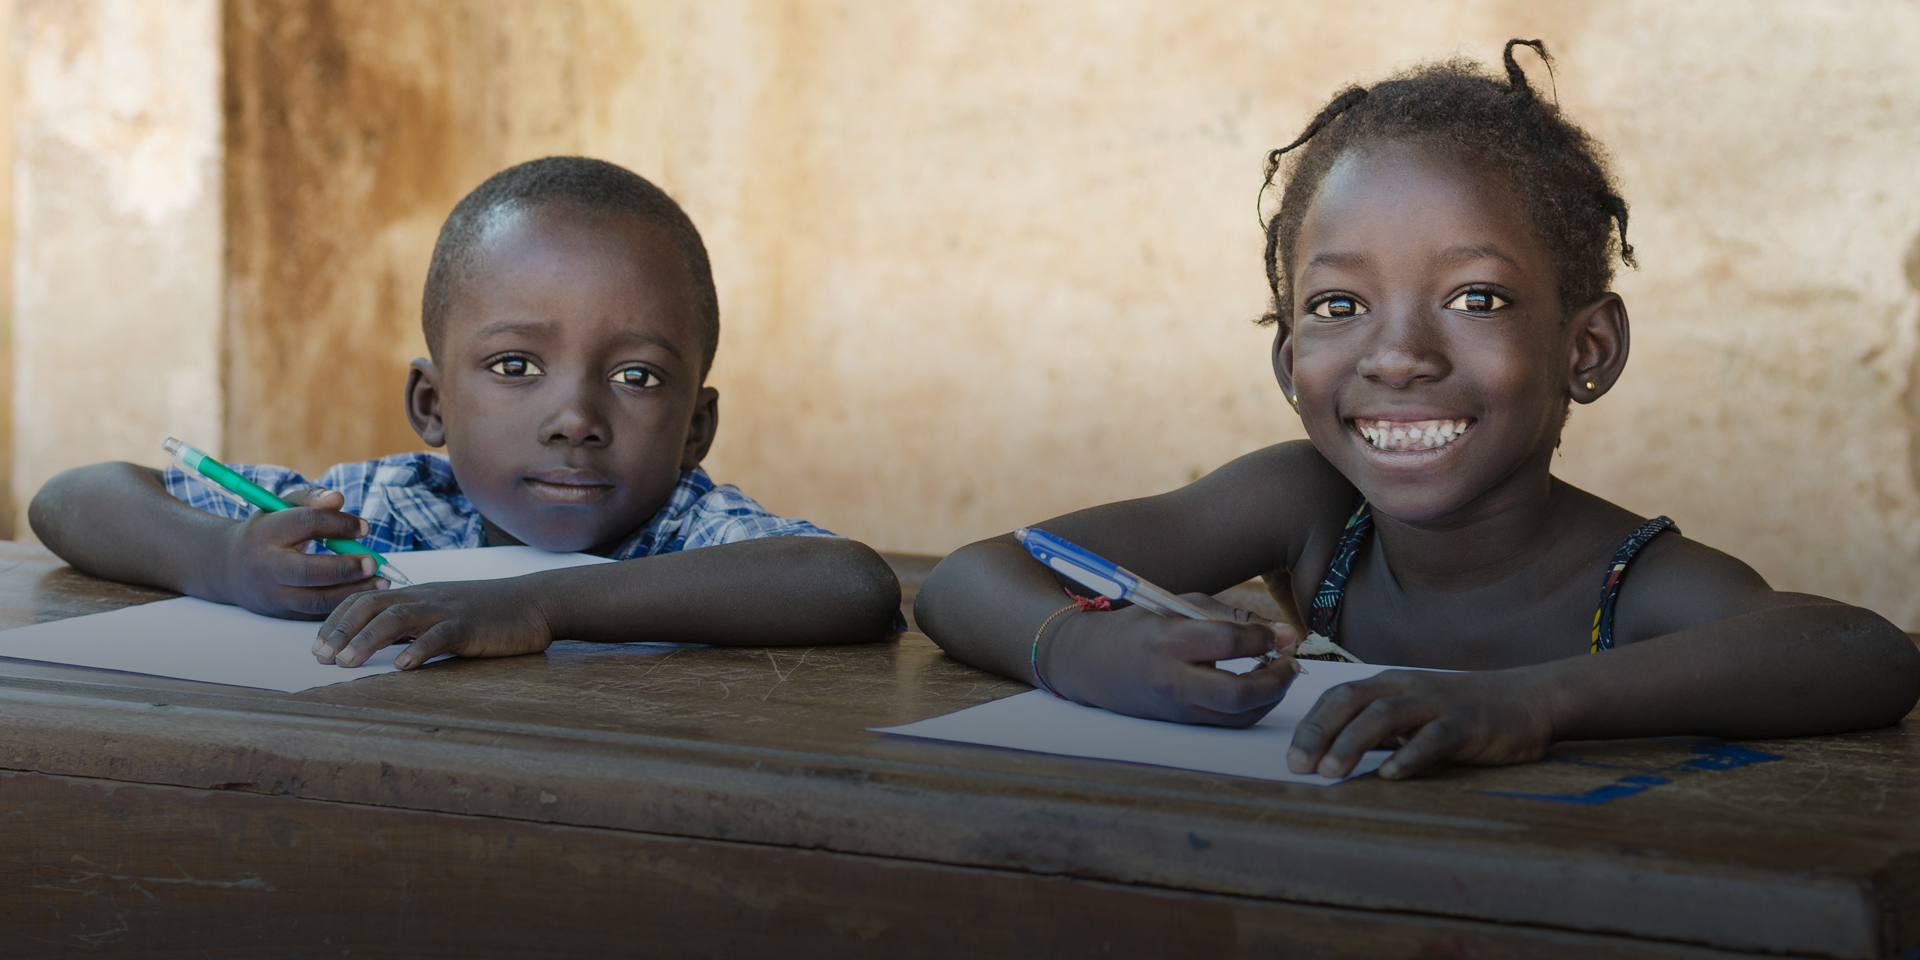 Two children smiling while sitting at a long bench and writing with pens on individual pieces of paper.